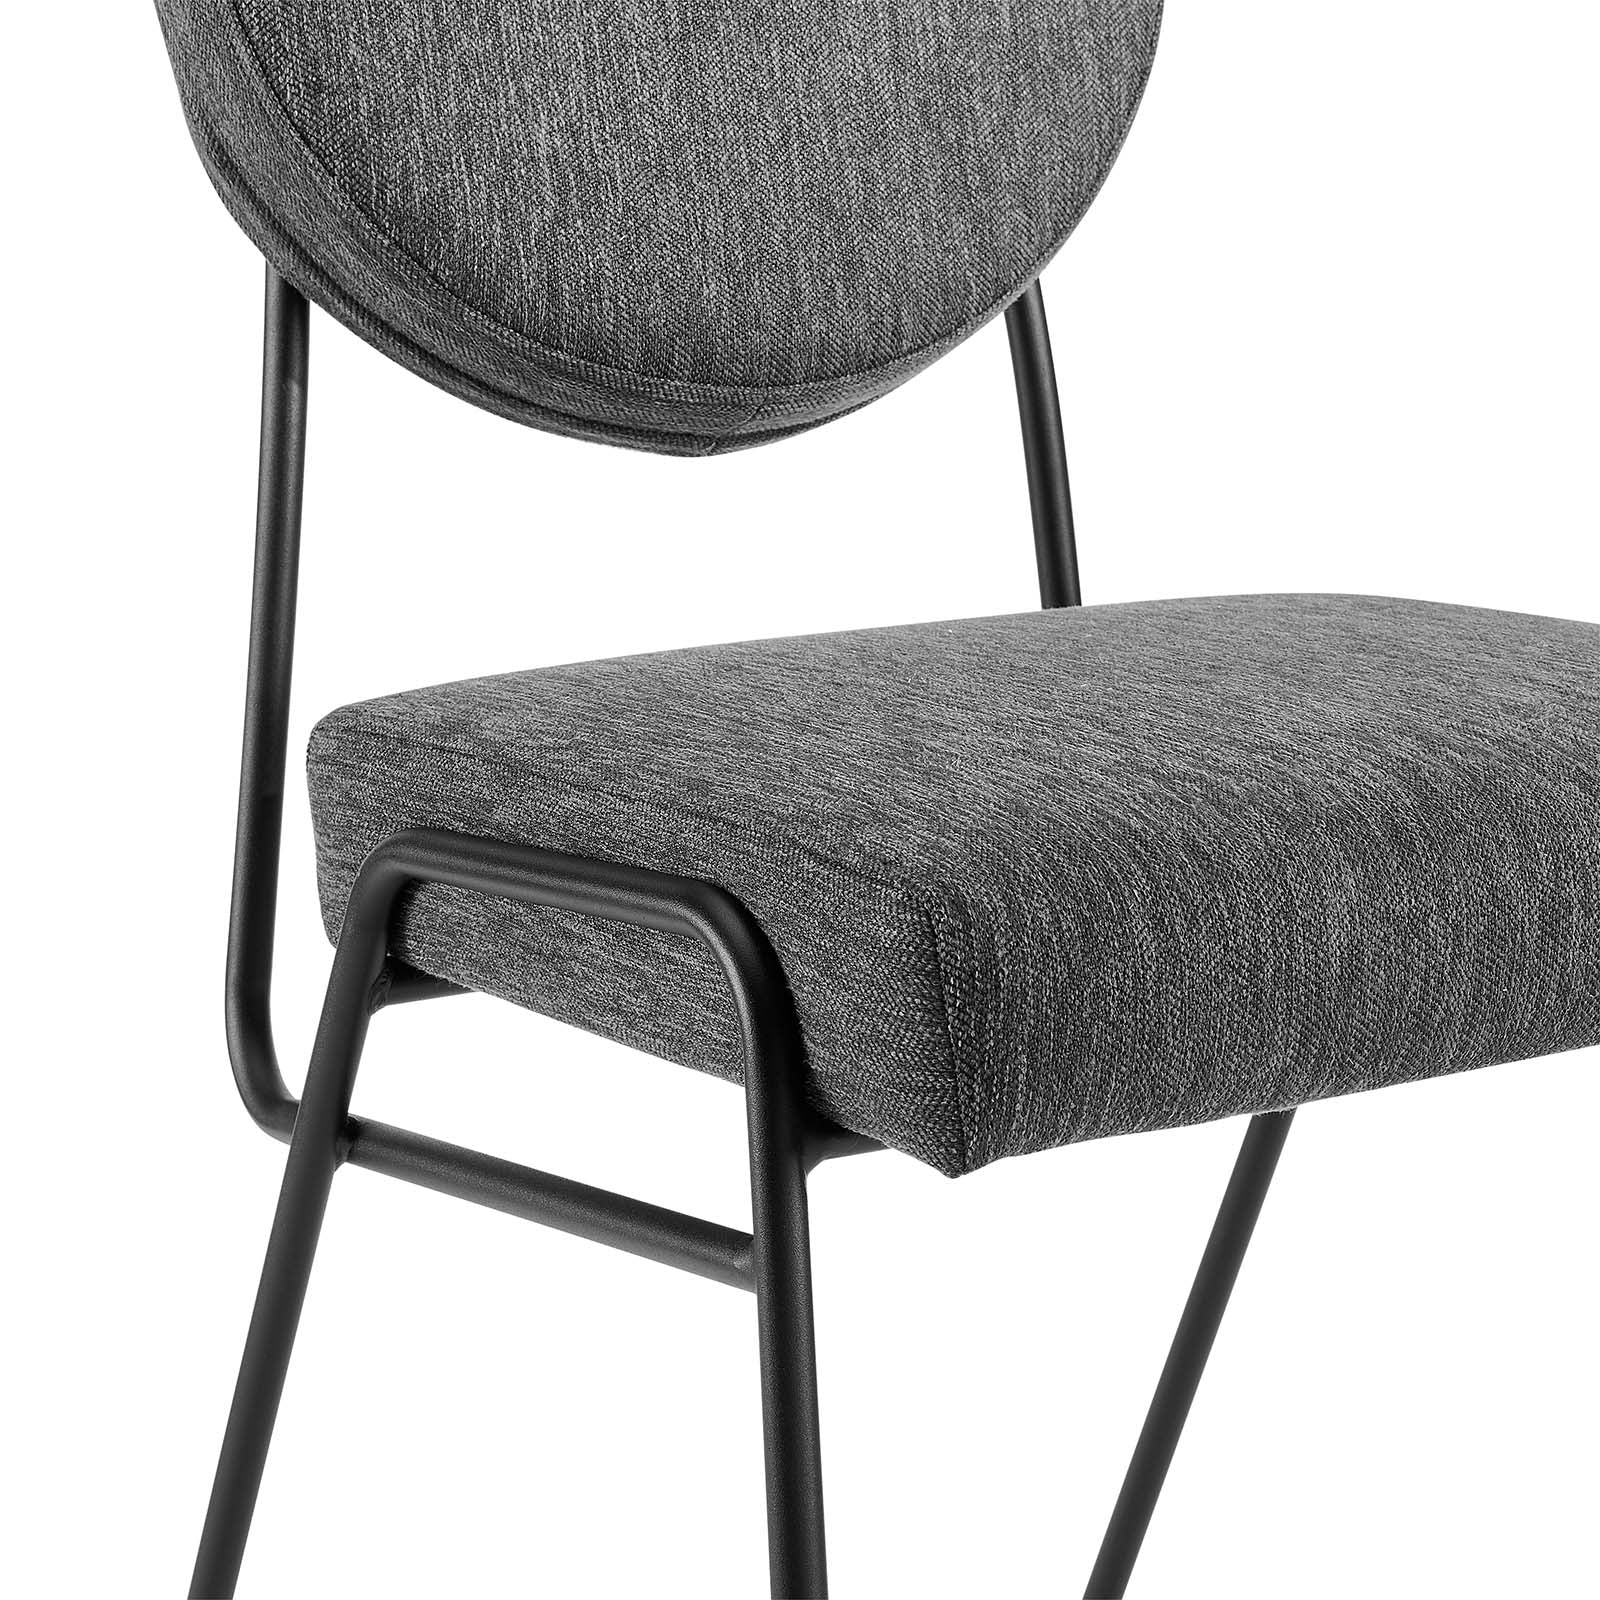 Craft Upholstered Fabric Dining Side Chair - East Shore Modern Home Furnishings